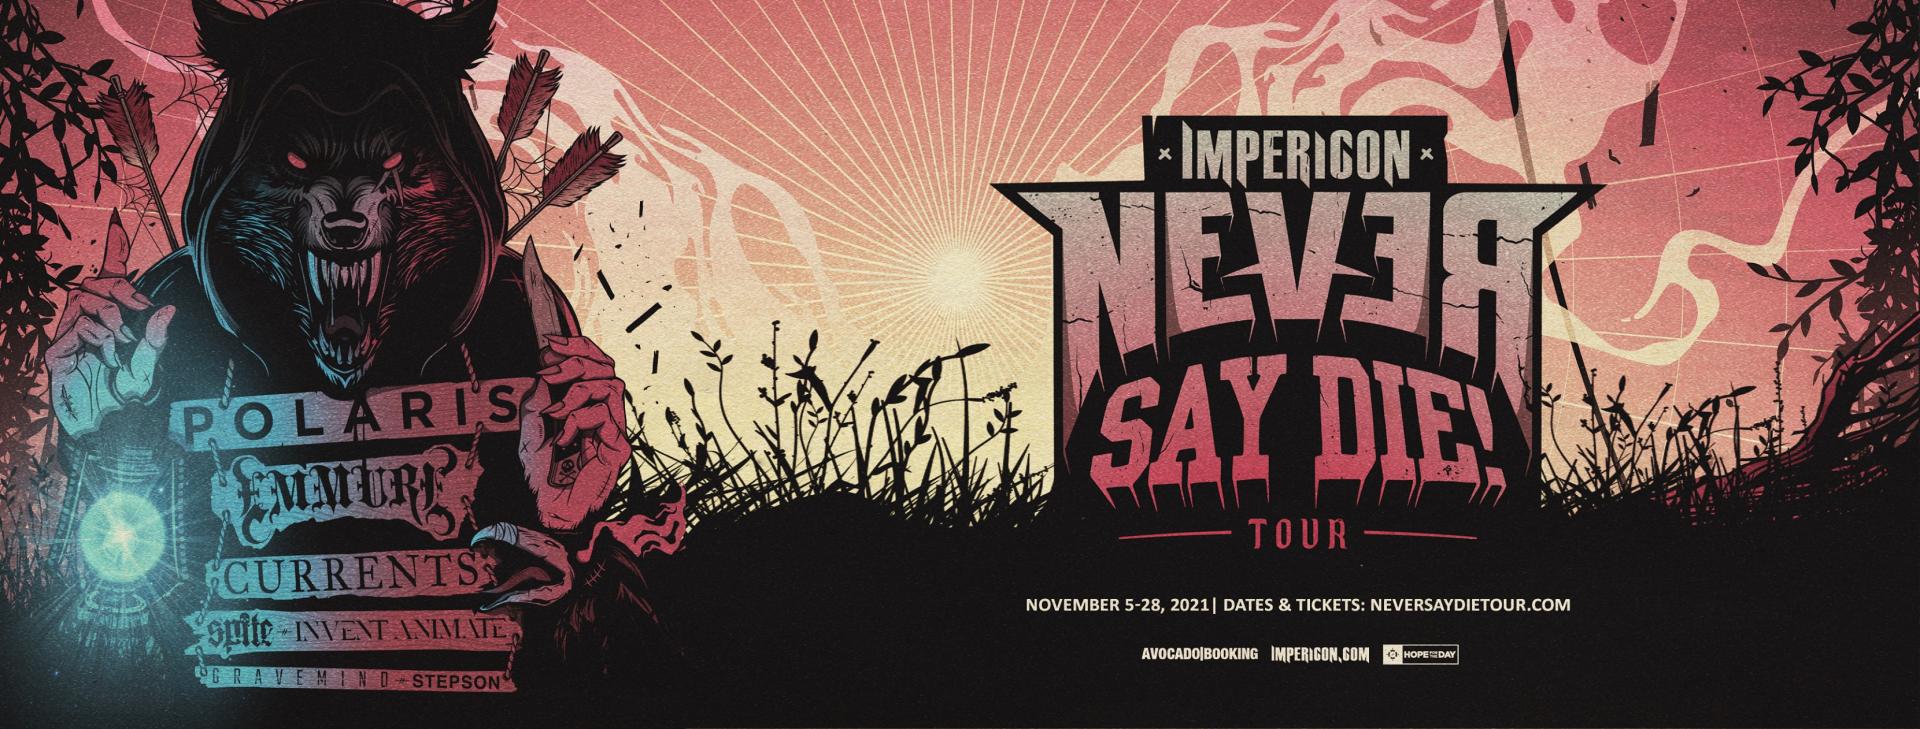 Impericon never say die tour 2021